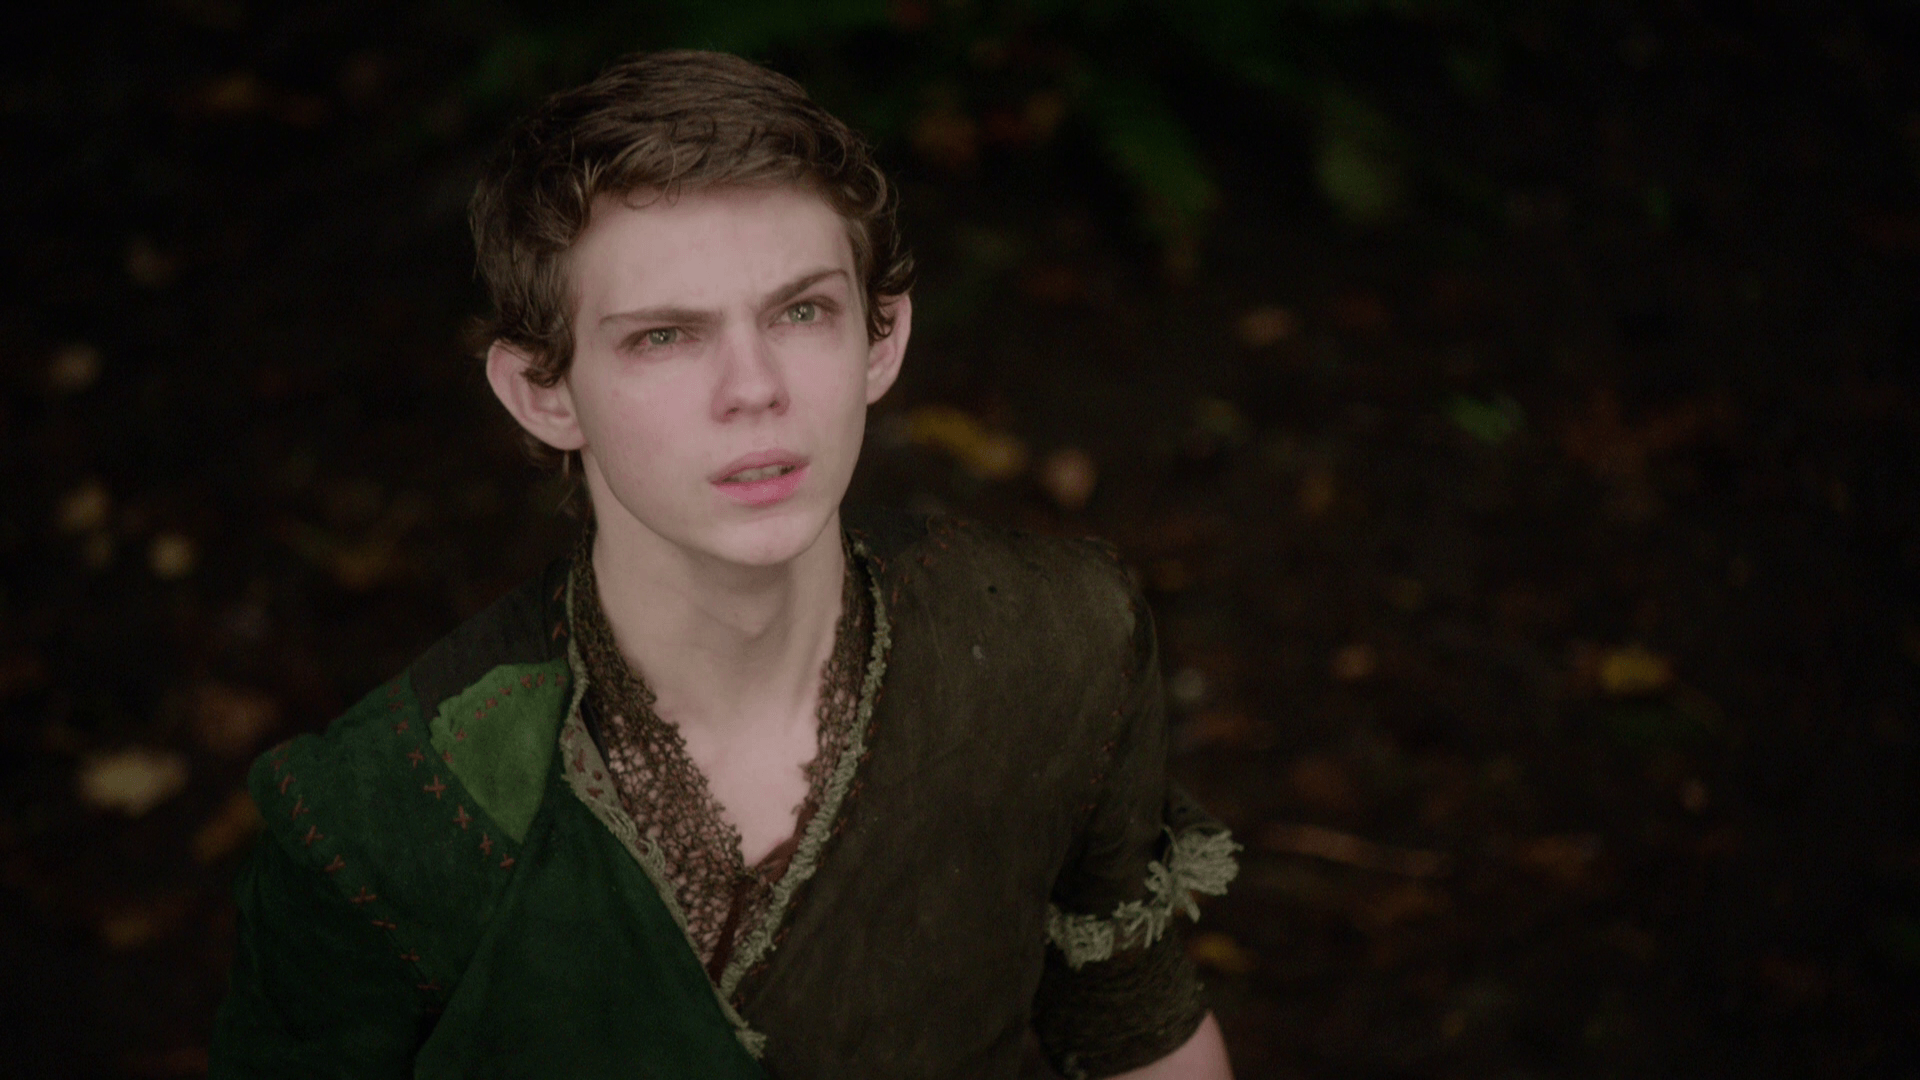 Peter Pan. Once Upon the Once Upon the Time